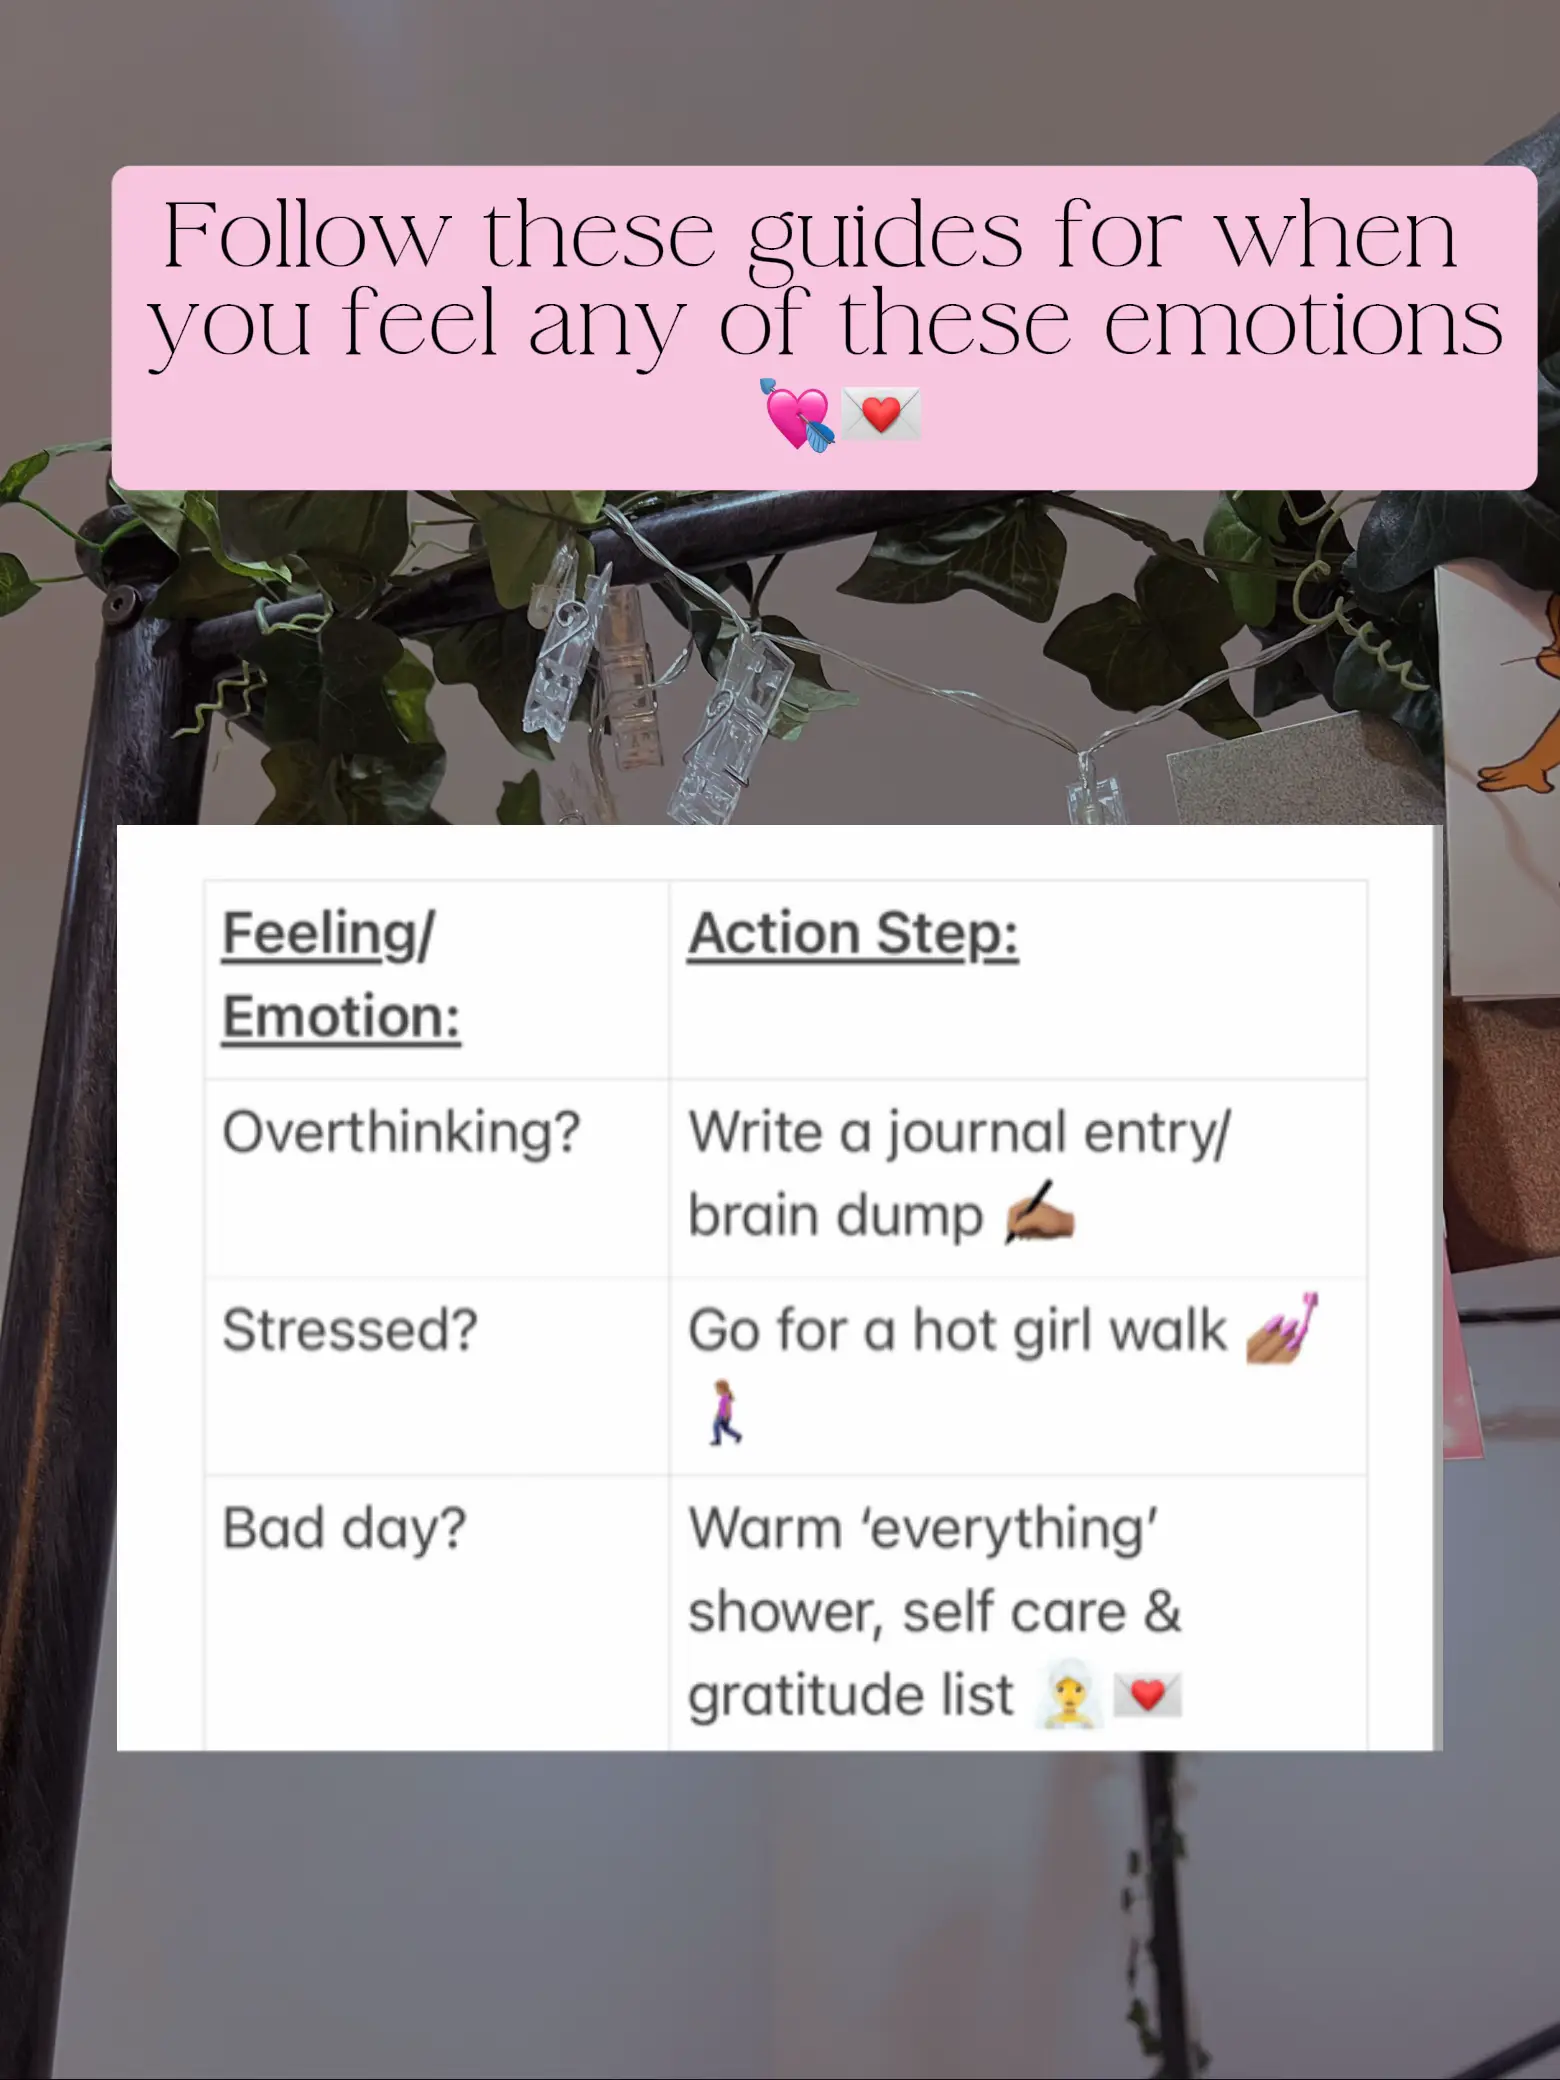  A list of steps to help with coping with emotions